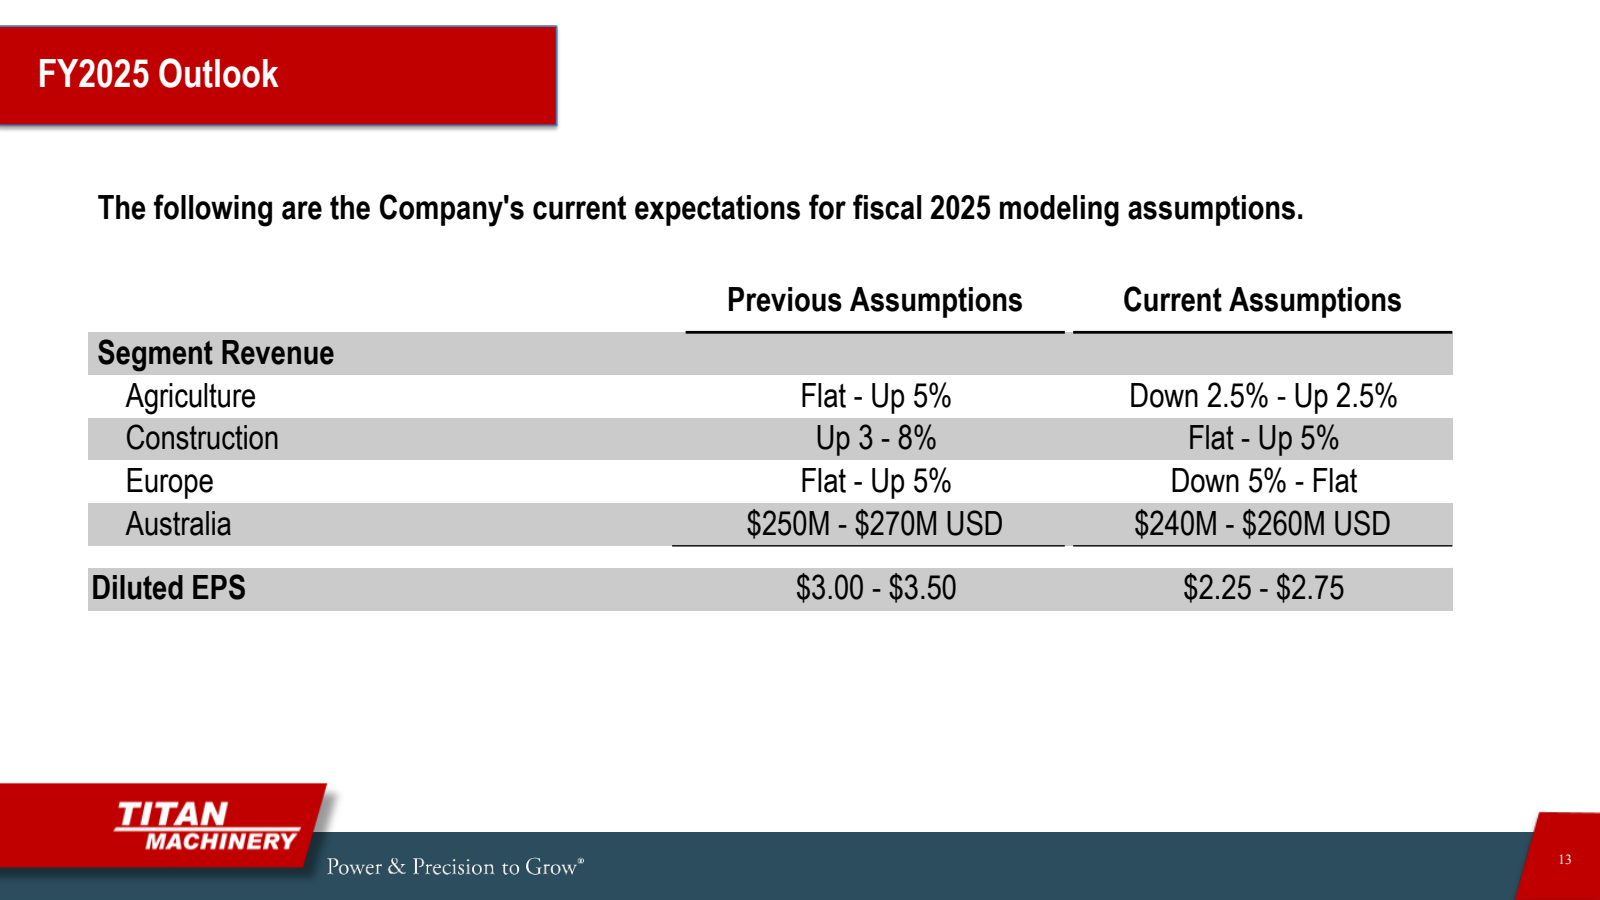 FY2025 Outlook 

The